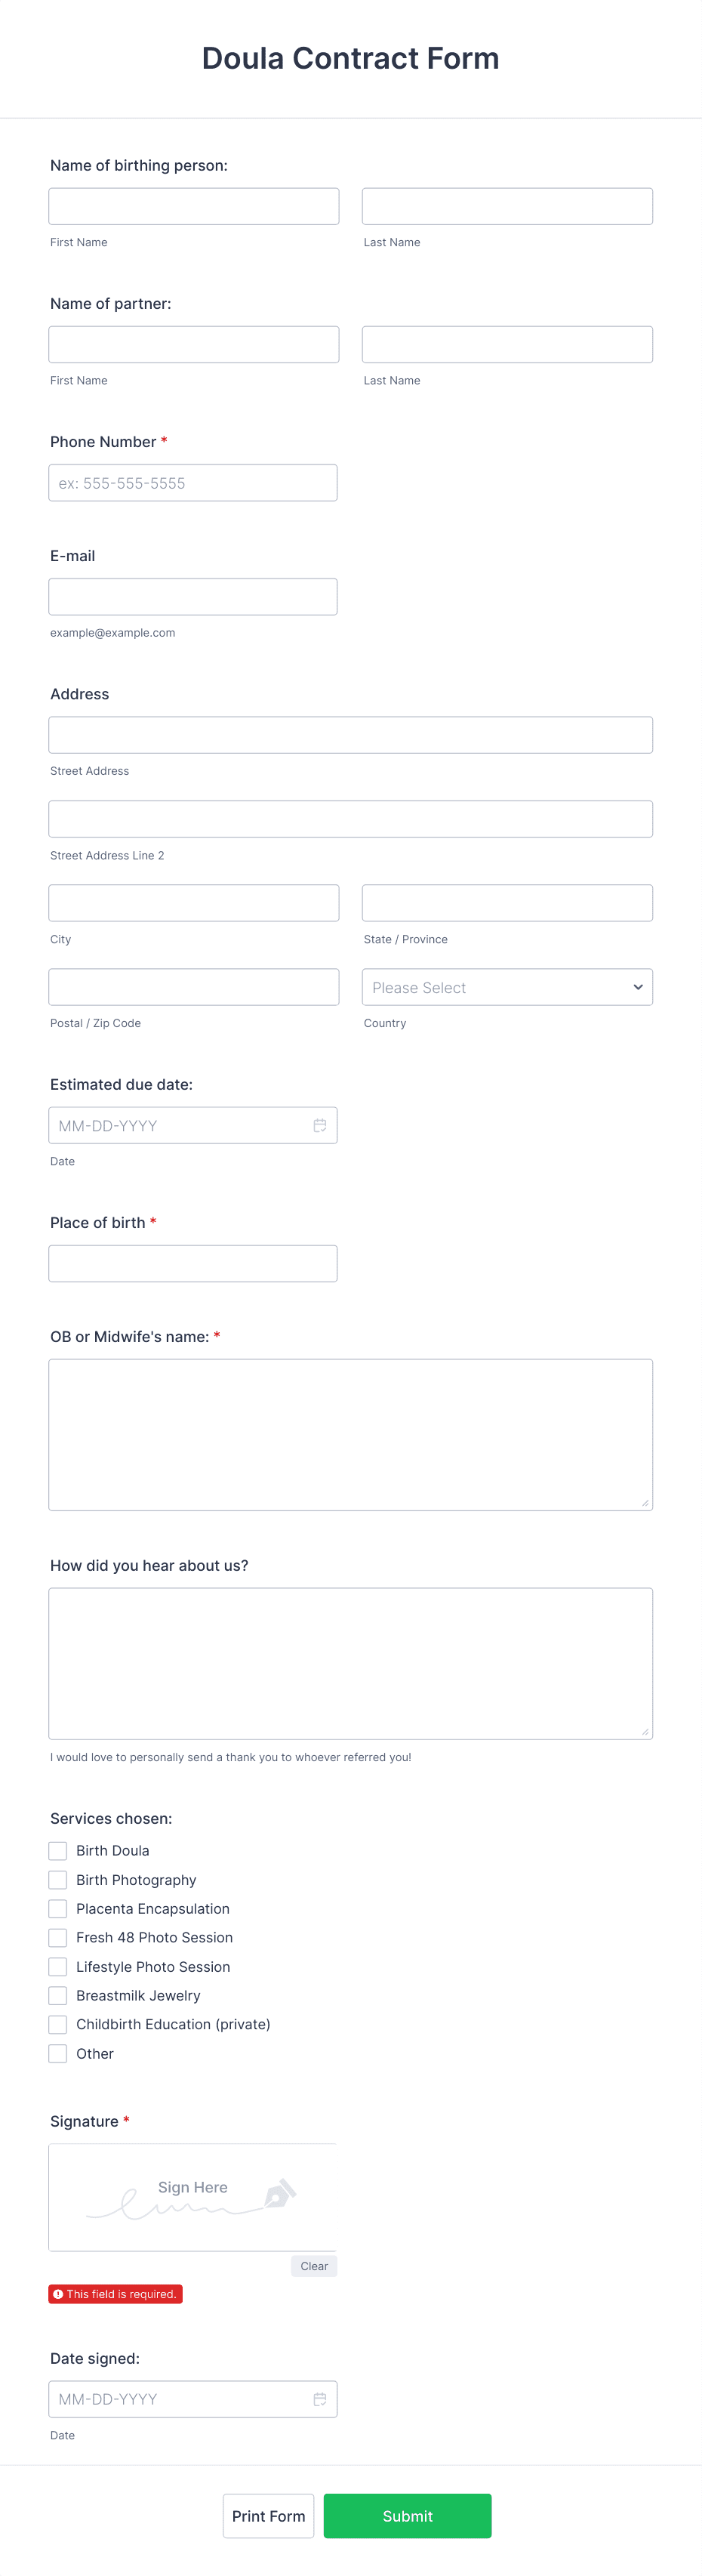 Doula Contract Form Template | Jotform